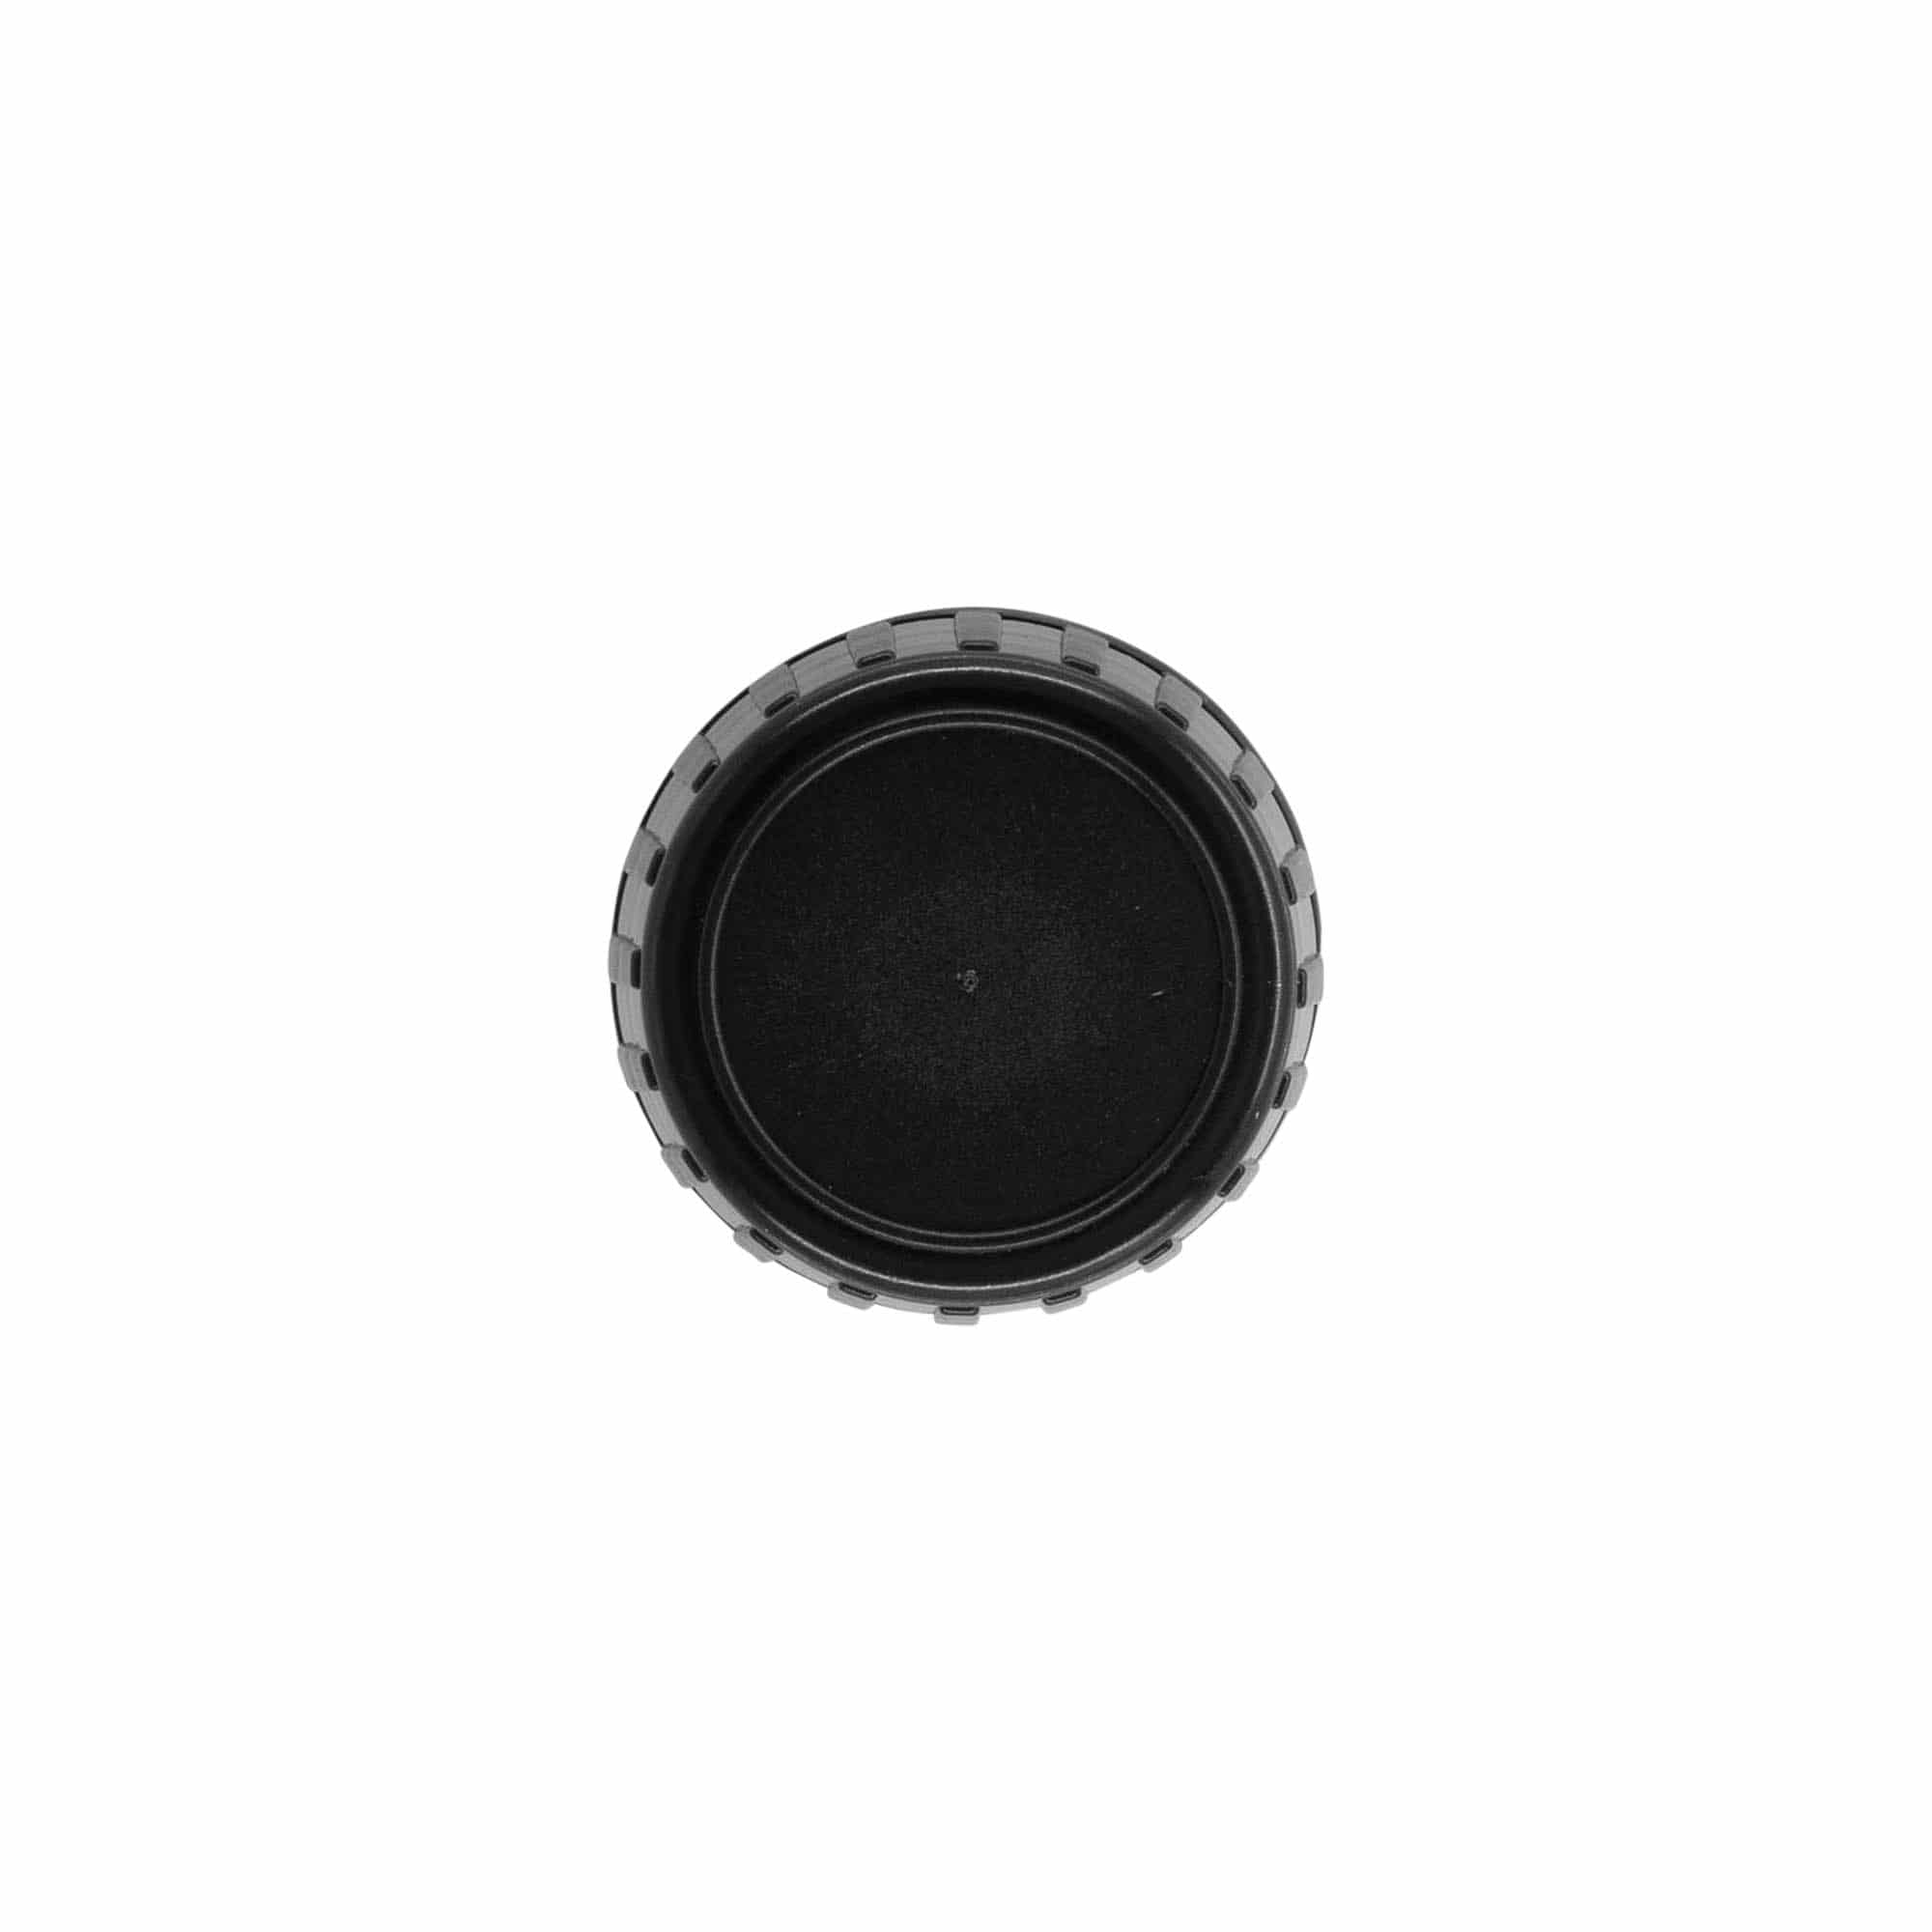 Screw cap with tamper evident seal, PP plastic, black, for opening: DIN 28